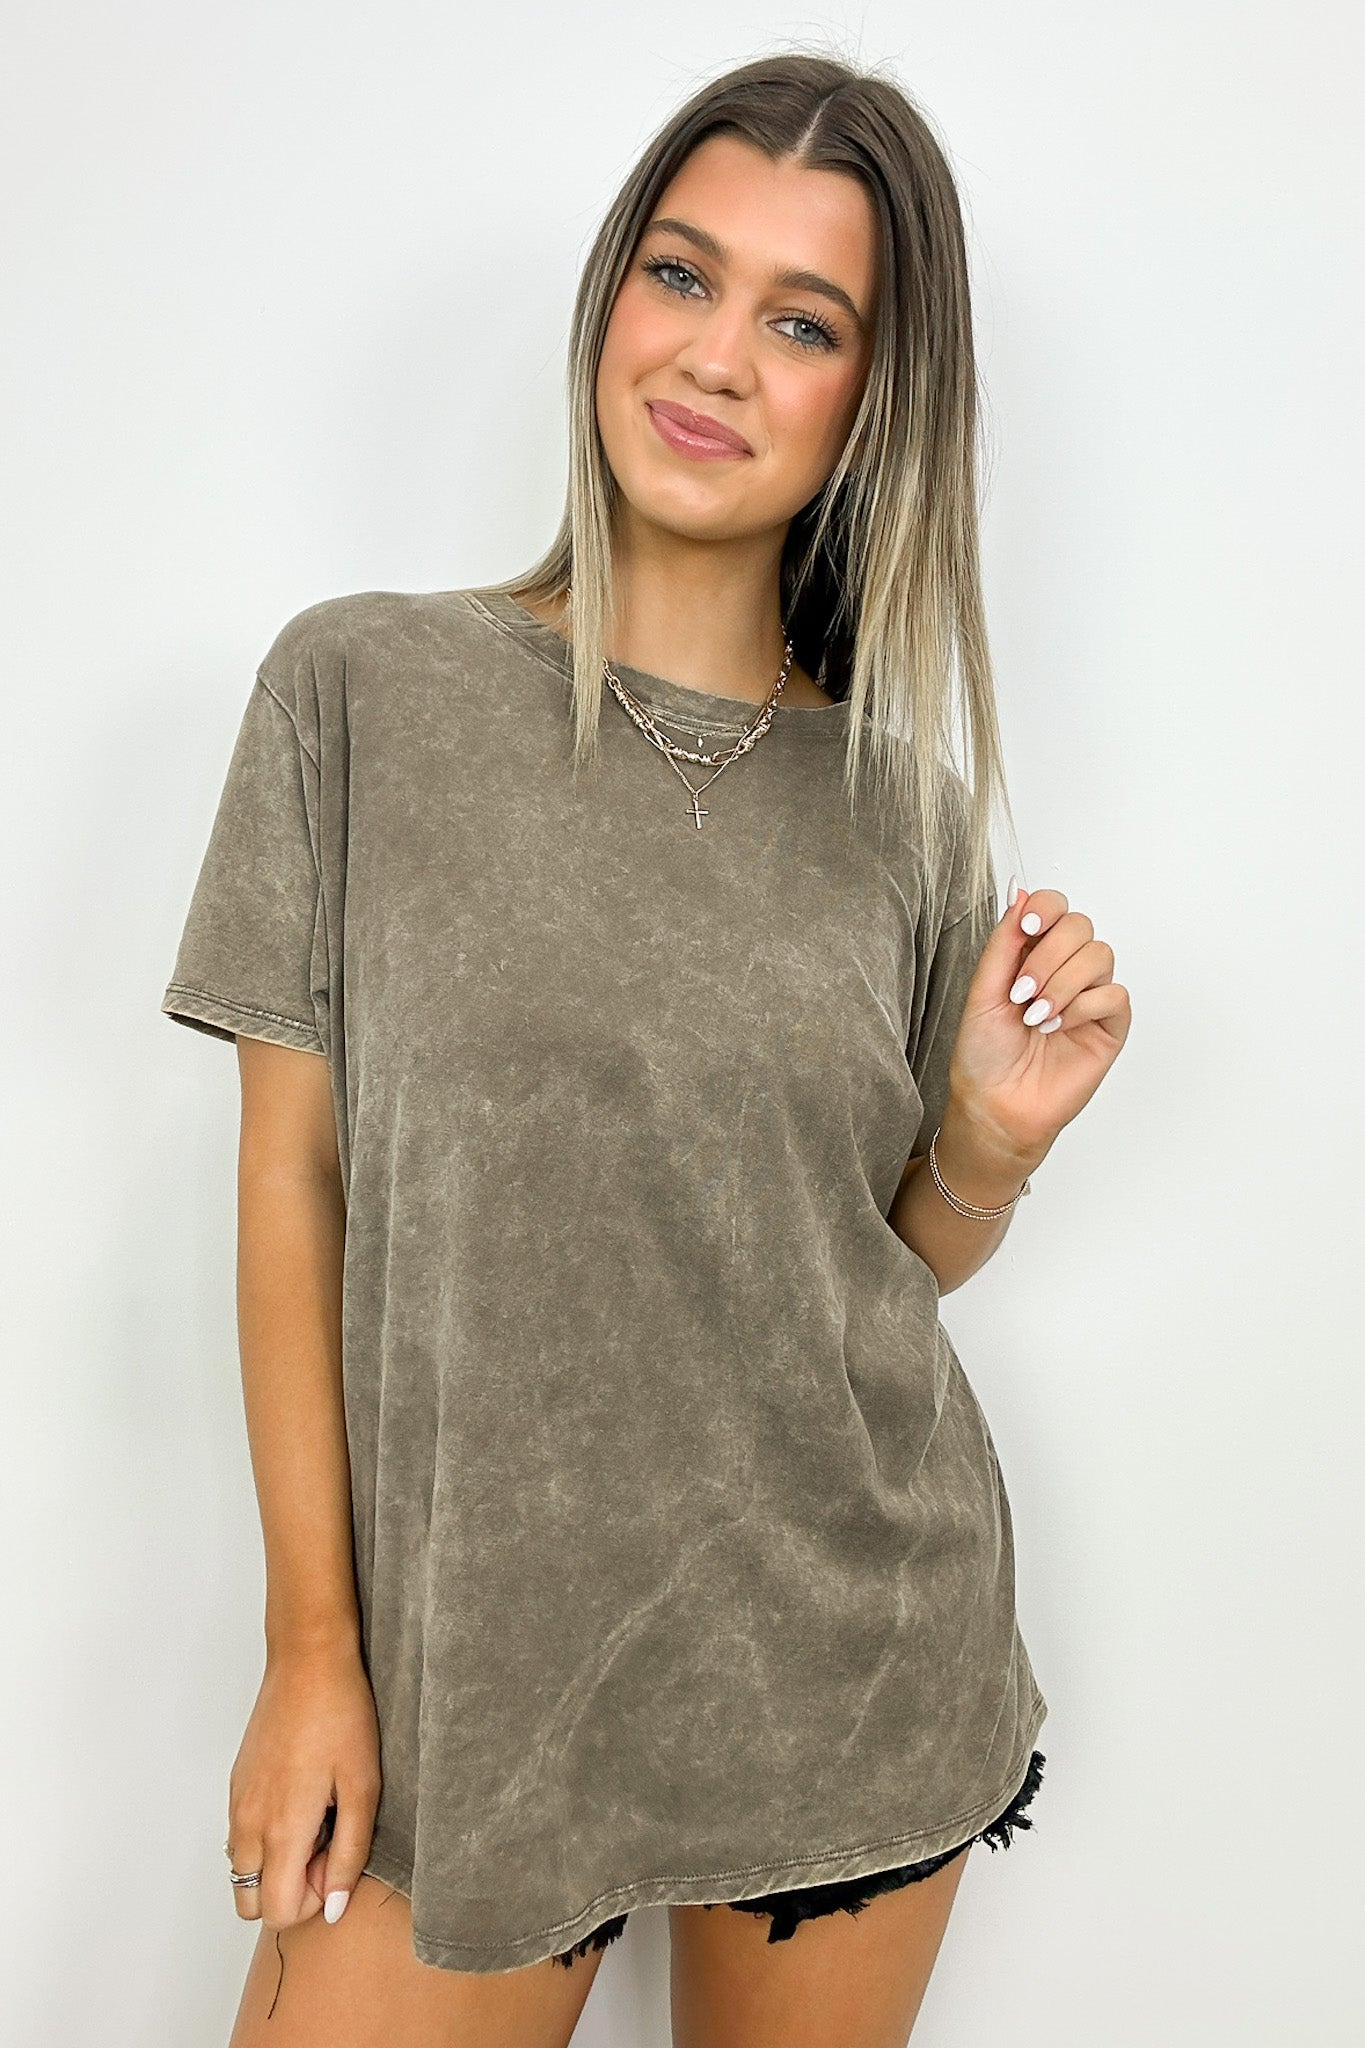 Mocha / S Kaline Mineral Washed Short Sleeve Top - BACK IN STOCK - Madison and Mallory